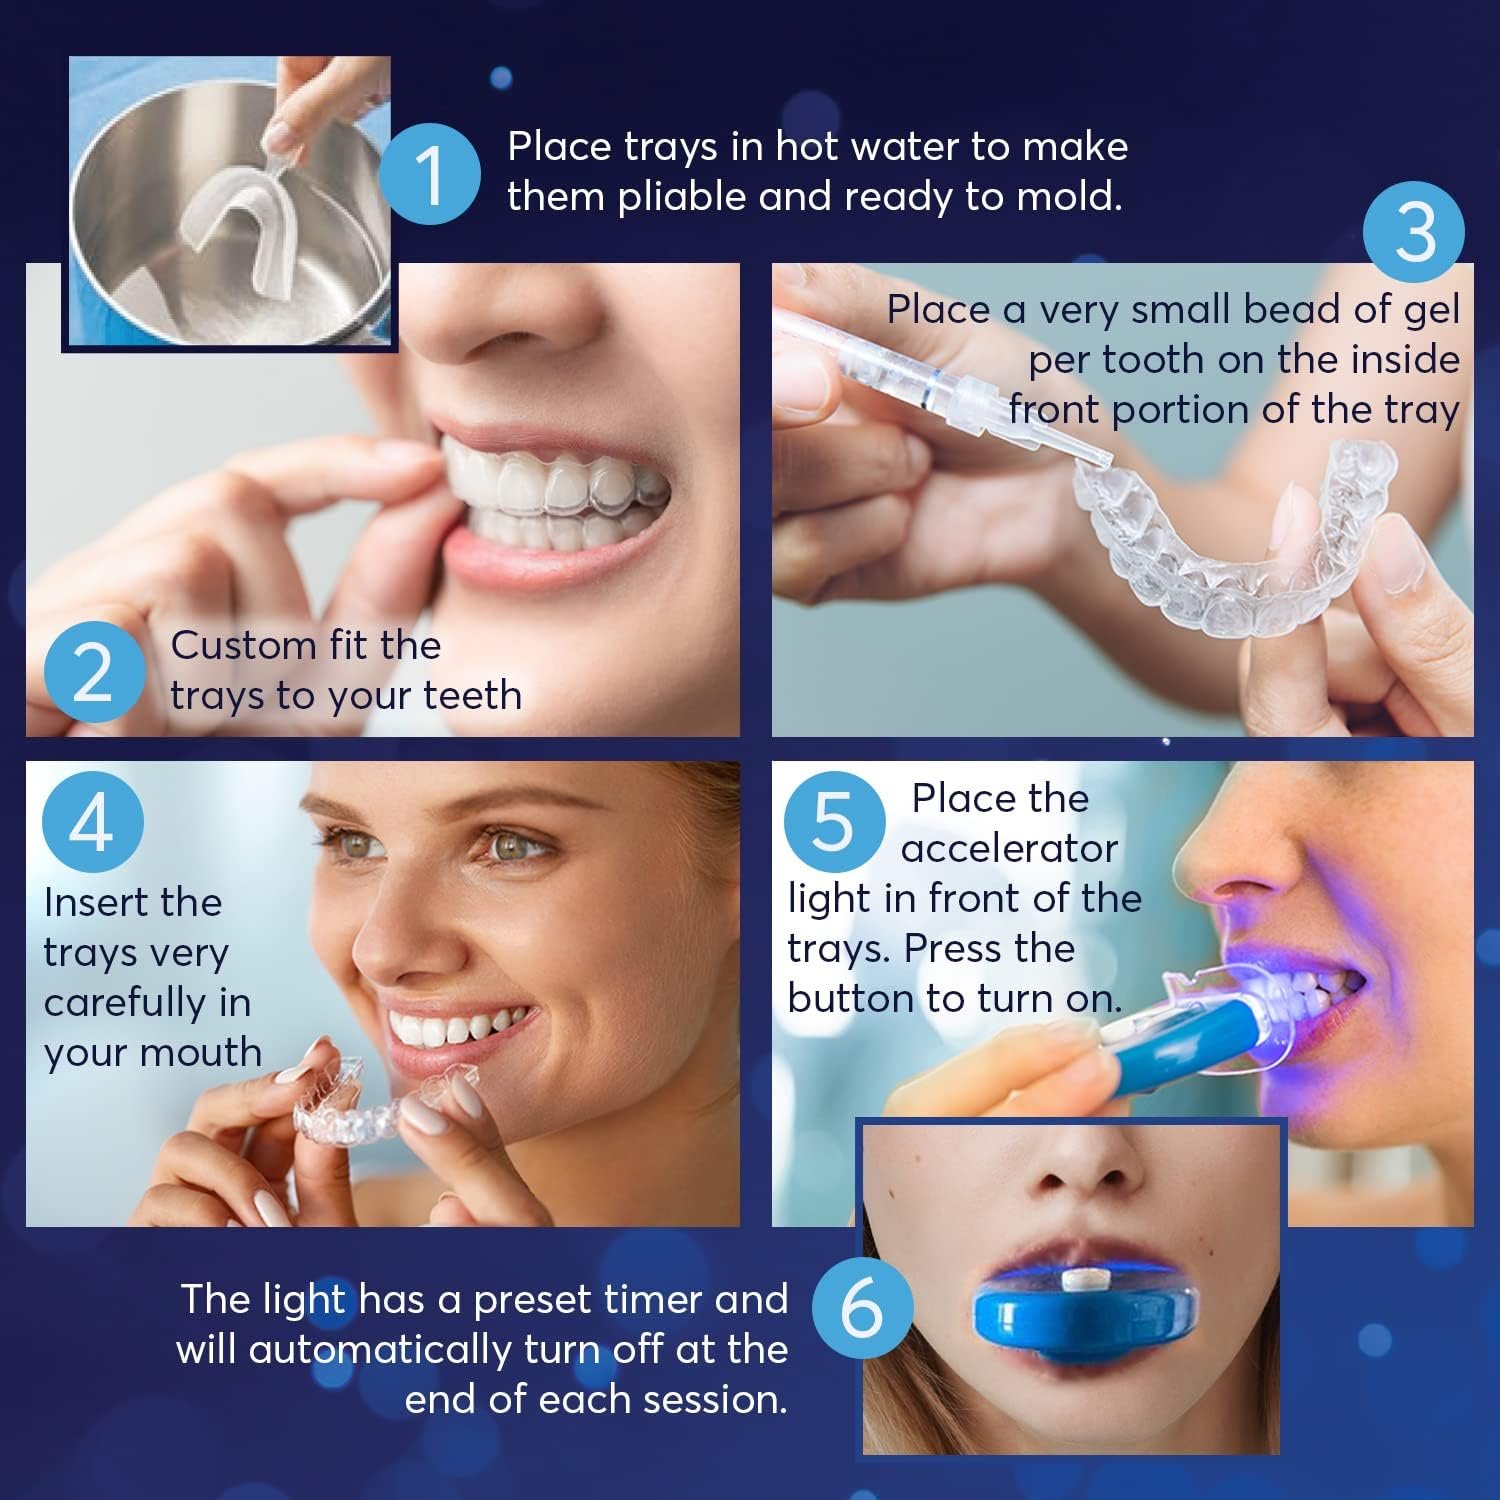 MagicBrite Complete Teeth Whitening Kit at Home Whitener - LED Light, 35% Carbamide Peroxide, 2 Mouth Trays, (3) 3ml Gel Syringes, Painless Effective